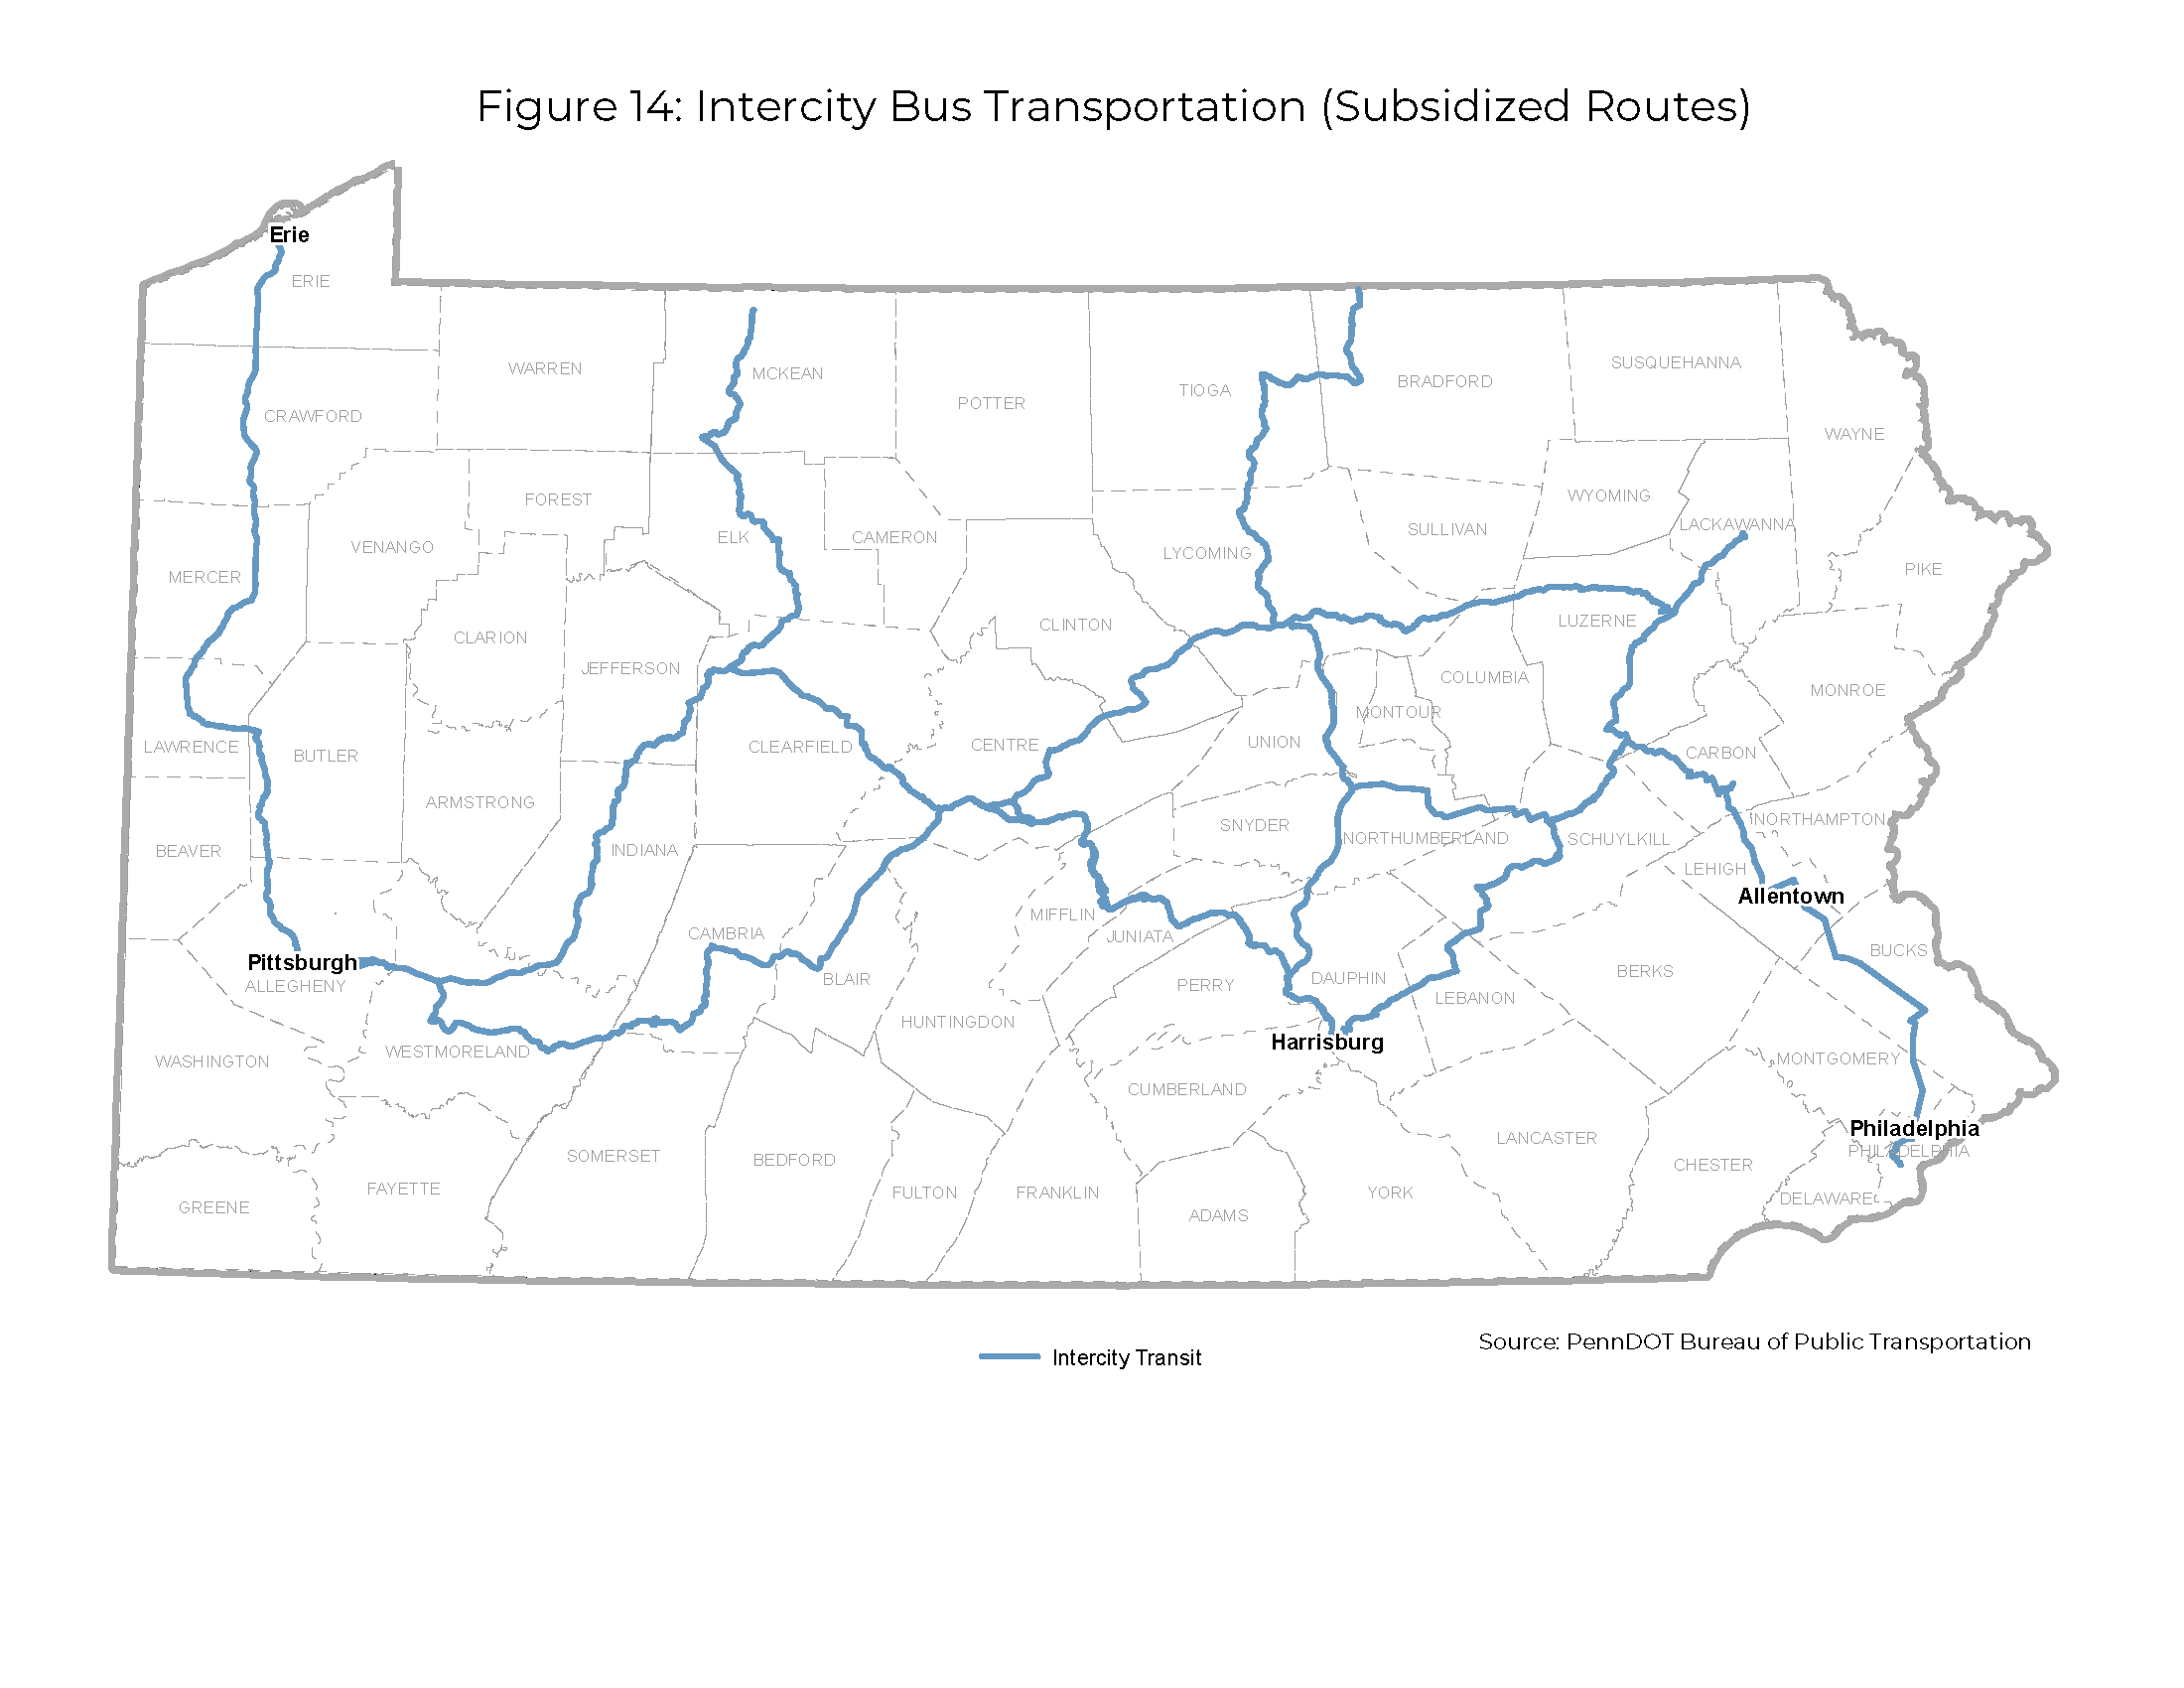 Figure 14 is PennDOT's Bureau of Public Transportation map of Pennsylvania illustrating the intercity transit routes from Erie, Pittsburgh, Harrisburg, Allentown, and Philadelphia.